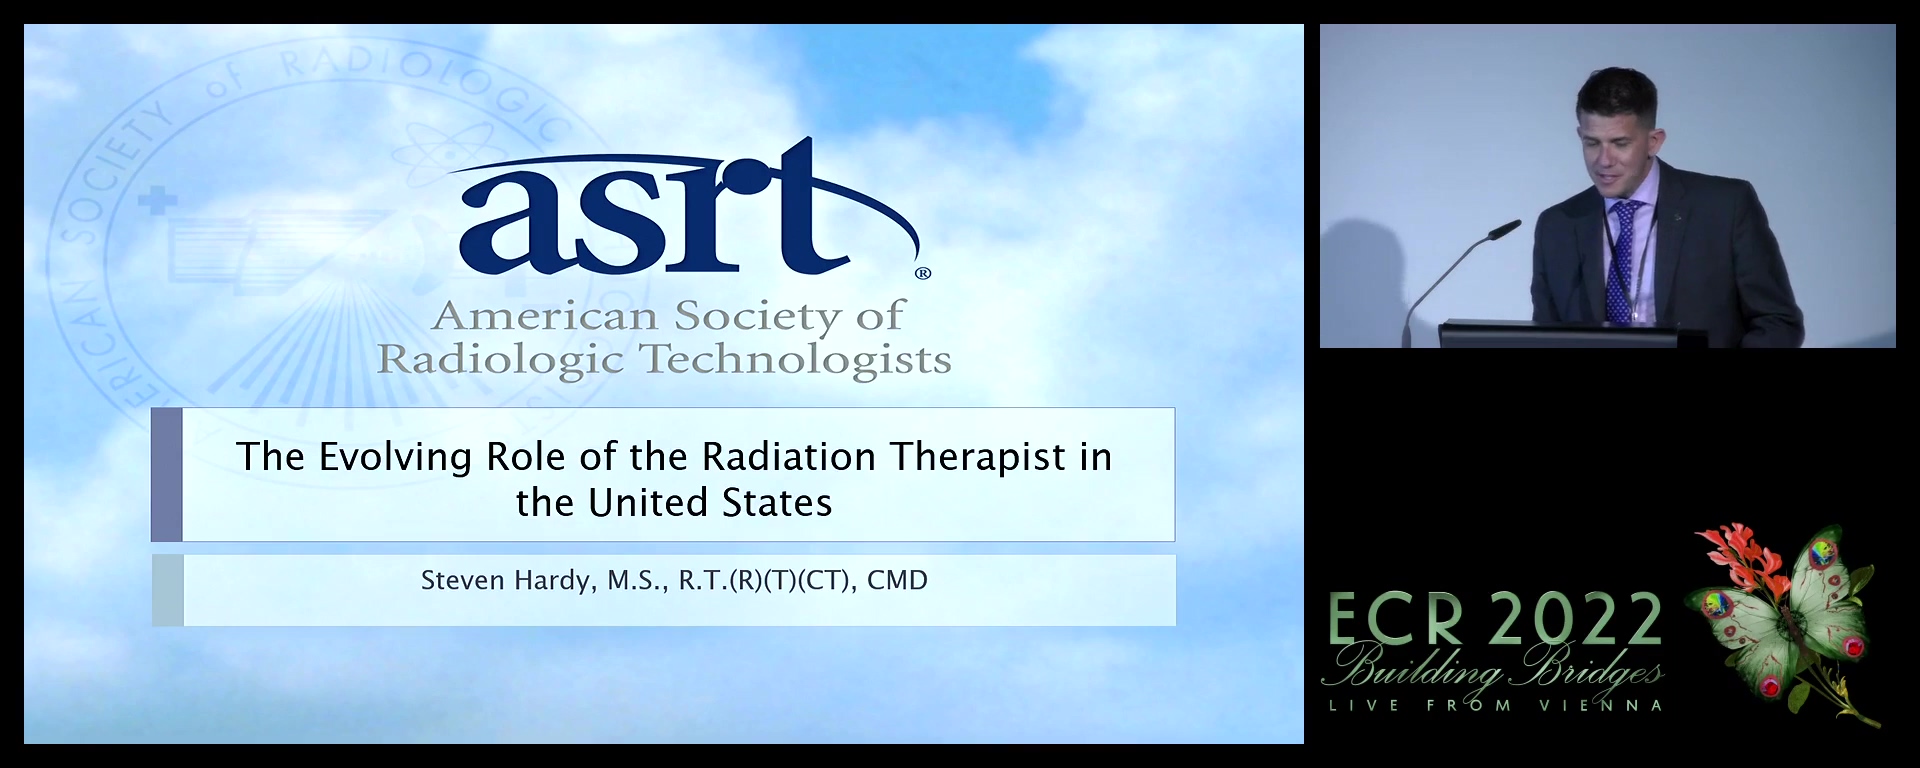 The evolving role of the radiation therapist in the United States - Steven Hardy, Albuquerque, NM / US